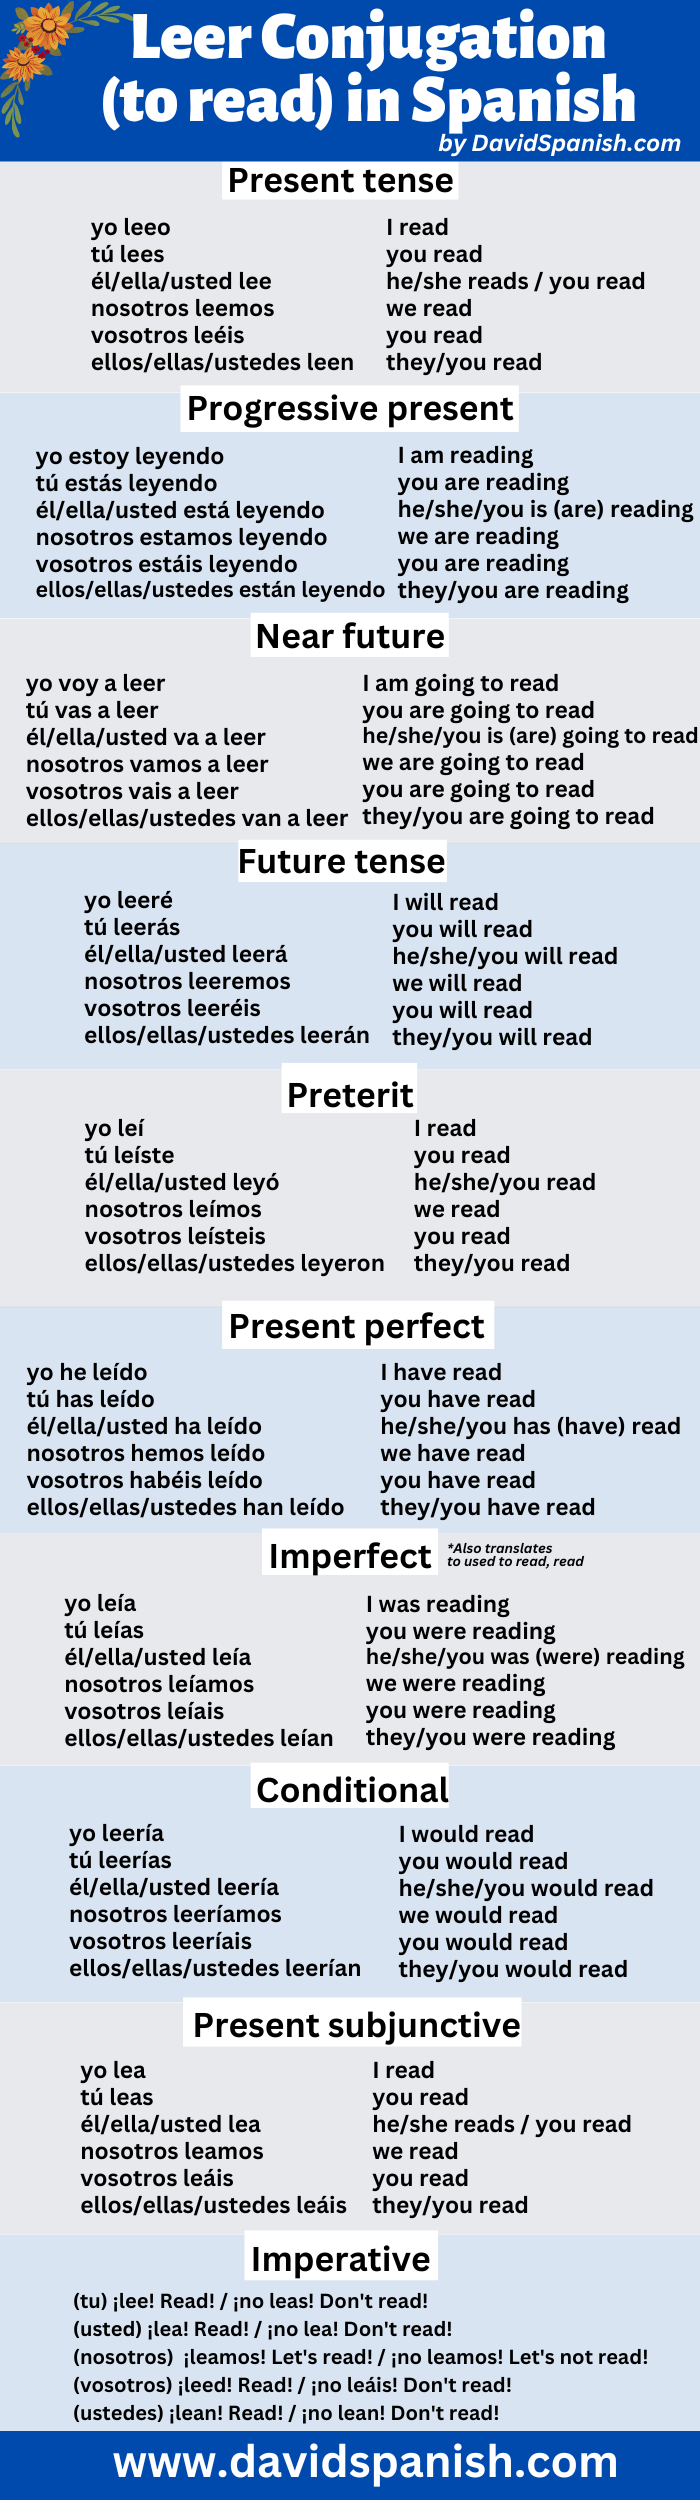 Leer (to read) conjugation table